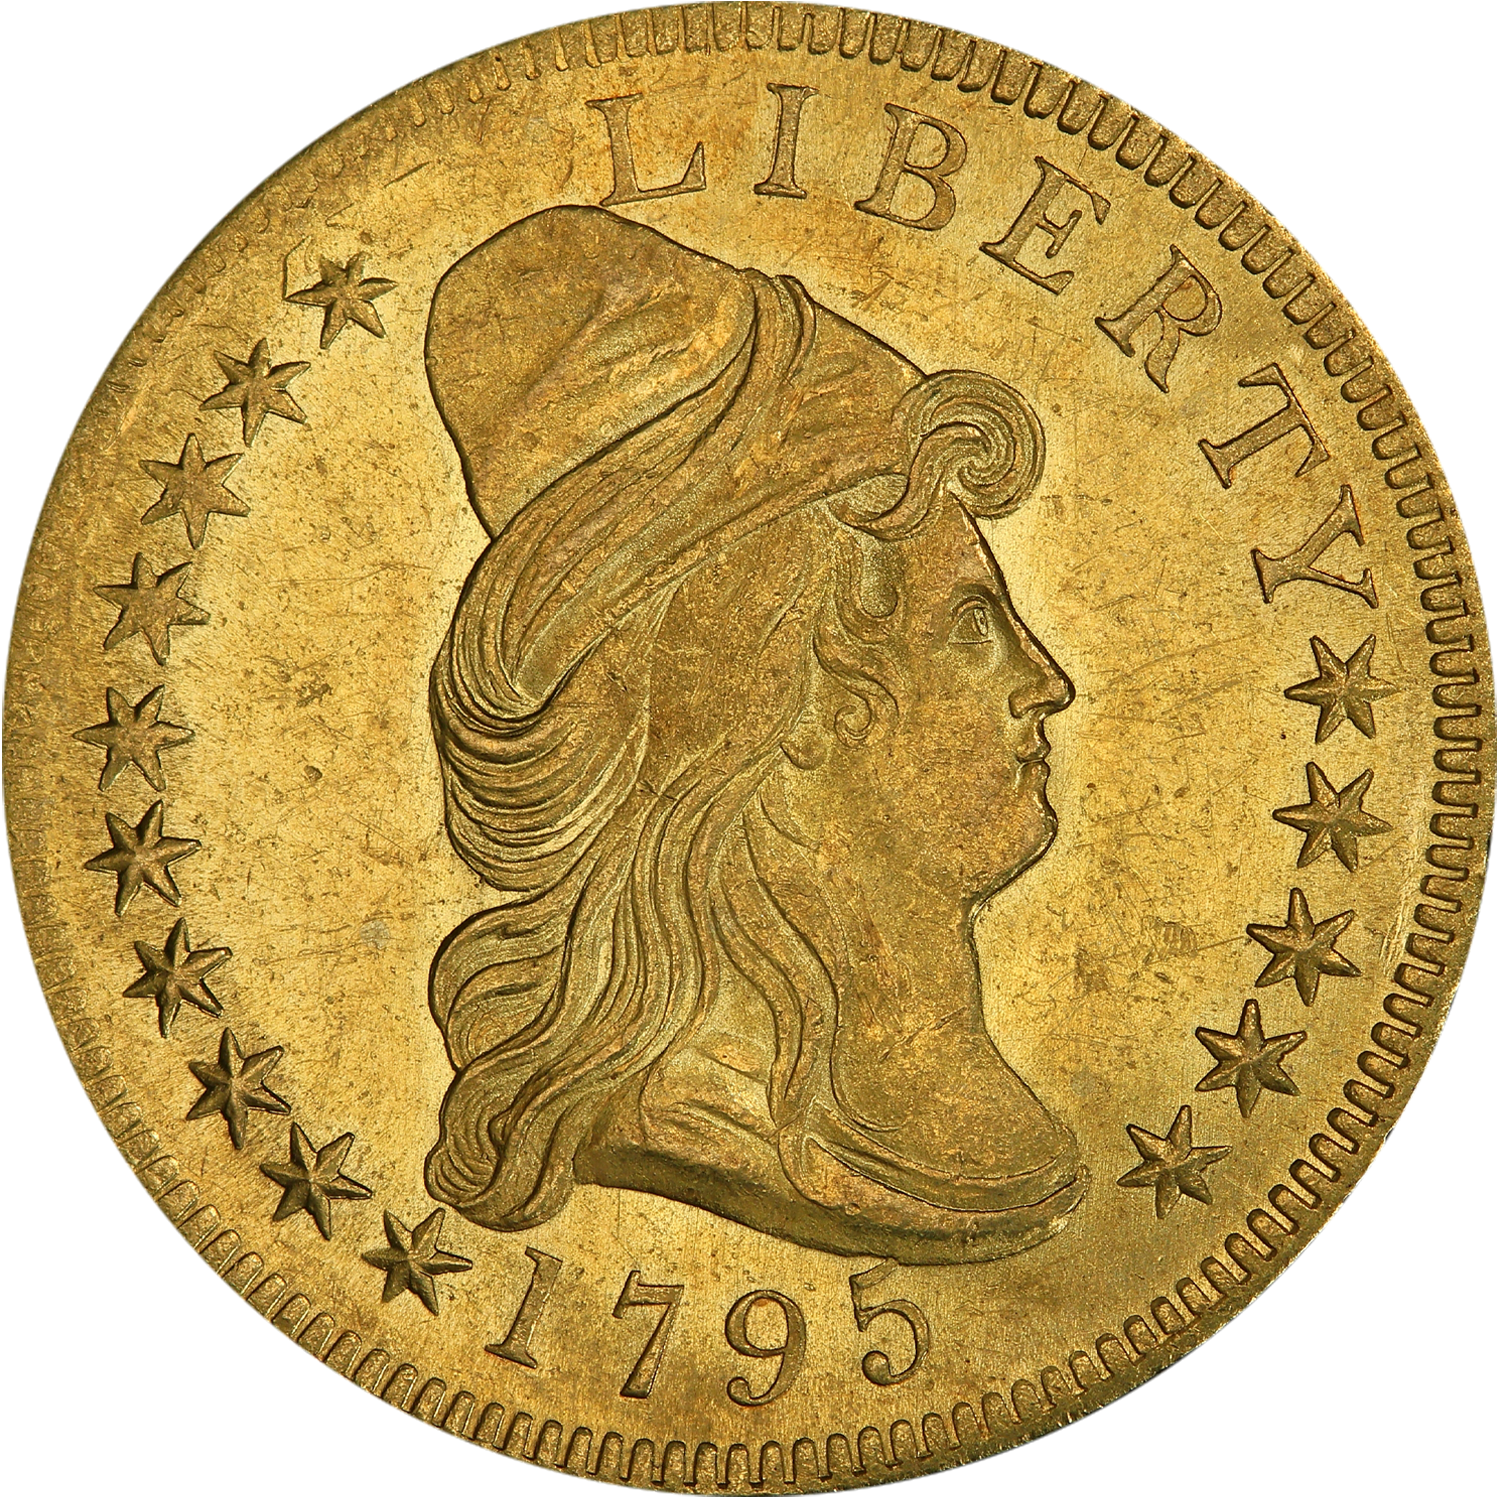 1795 gold eagle capped bust value